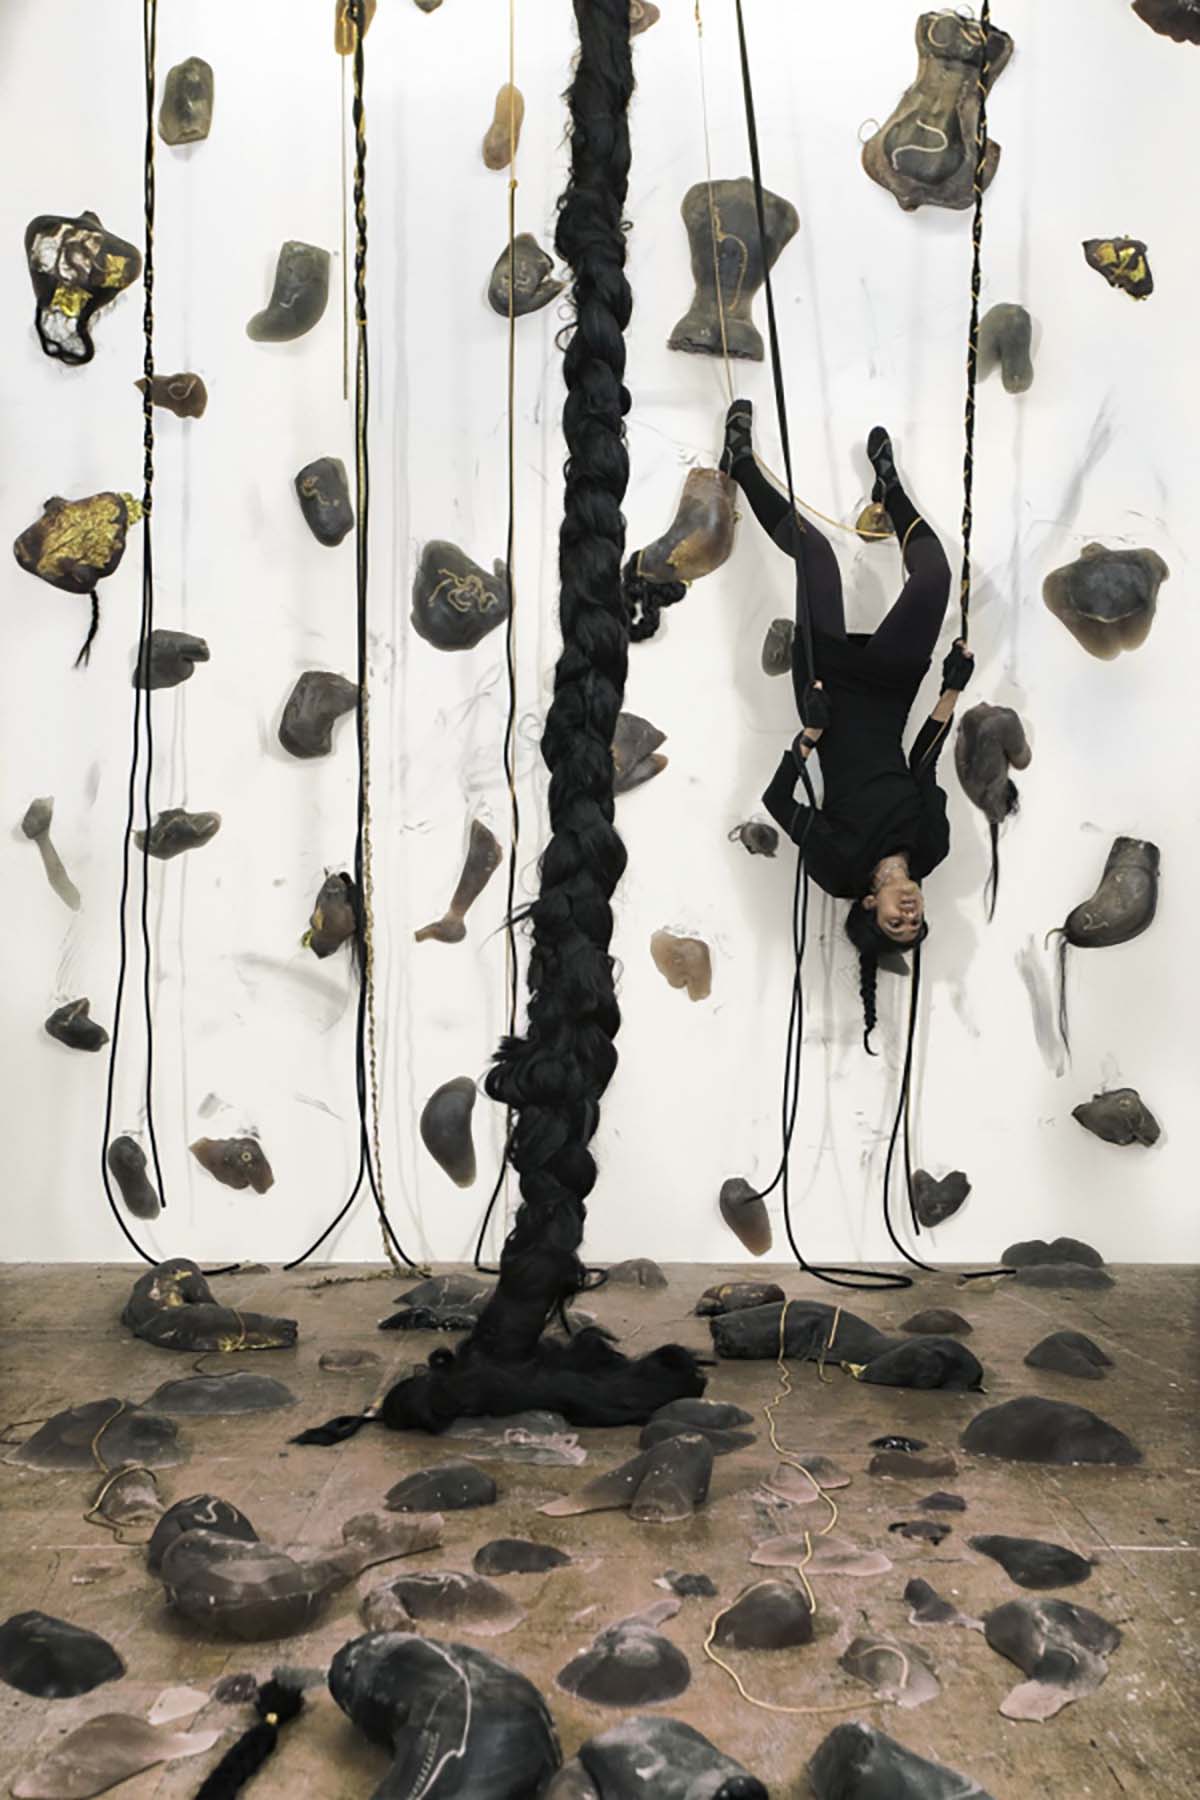 A woman hanging upside down on a rock climbing wall and a braid hanging from a ceiling